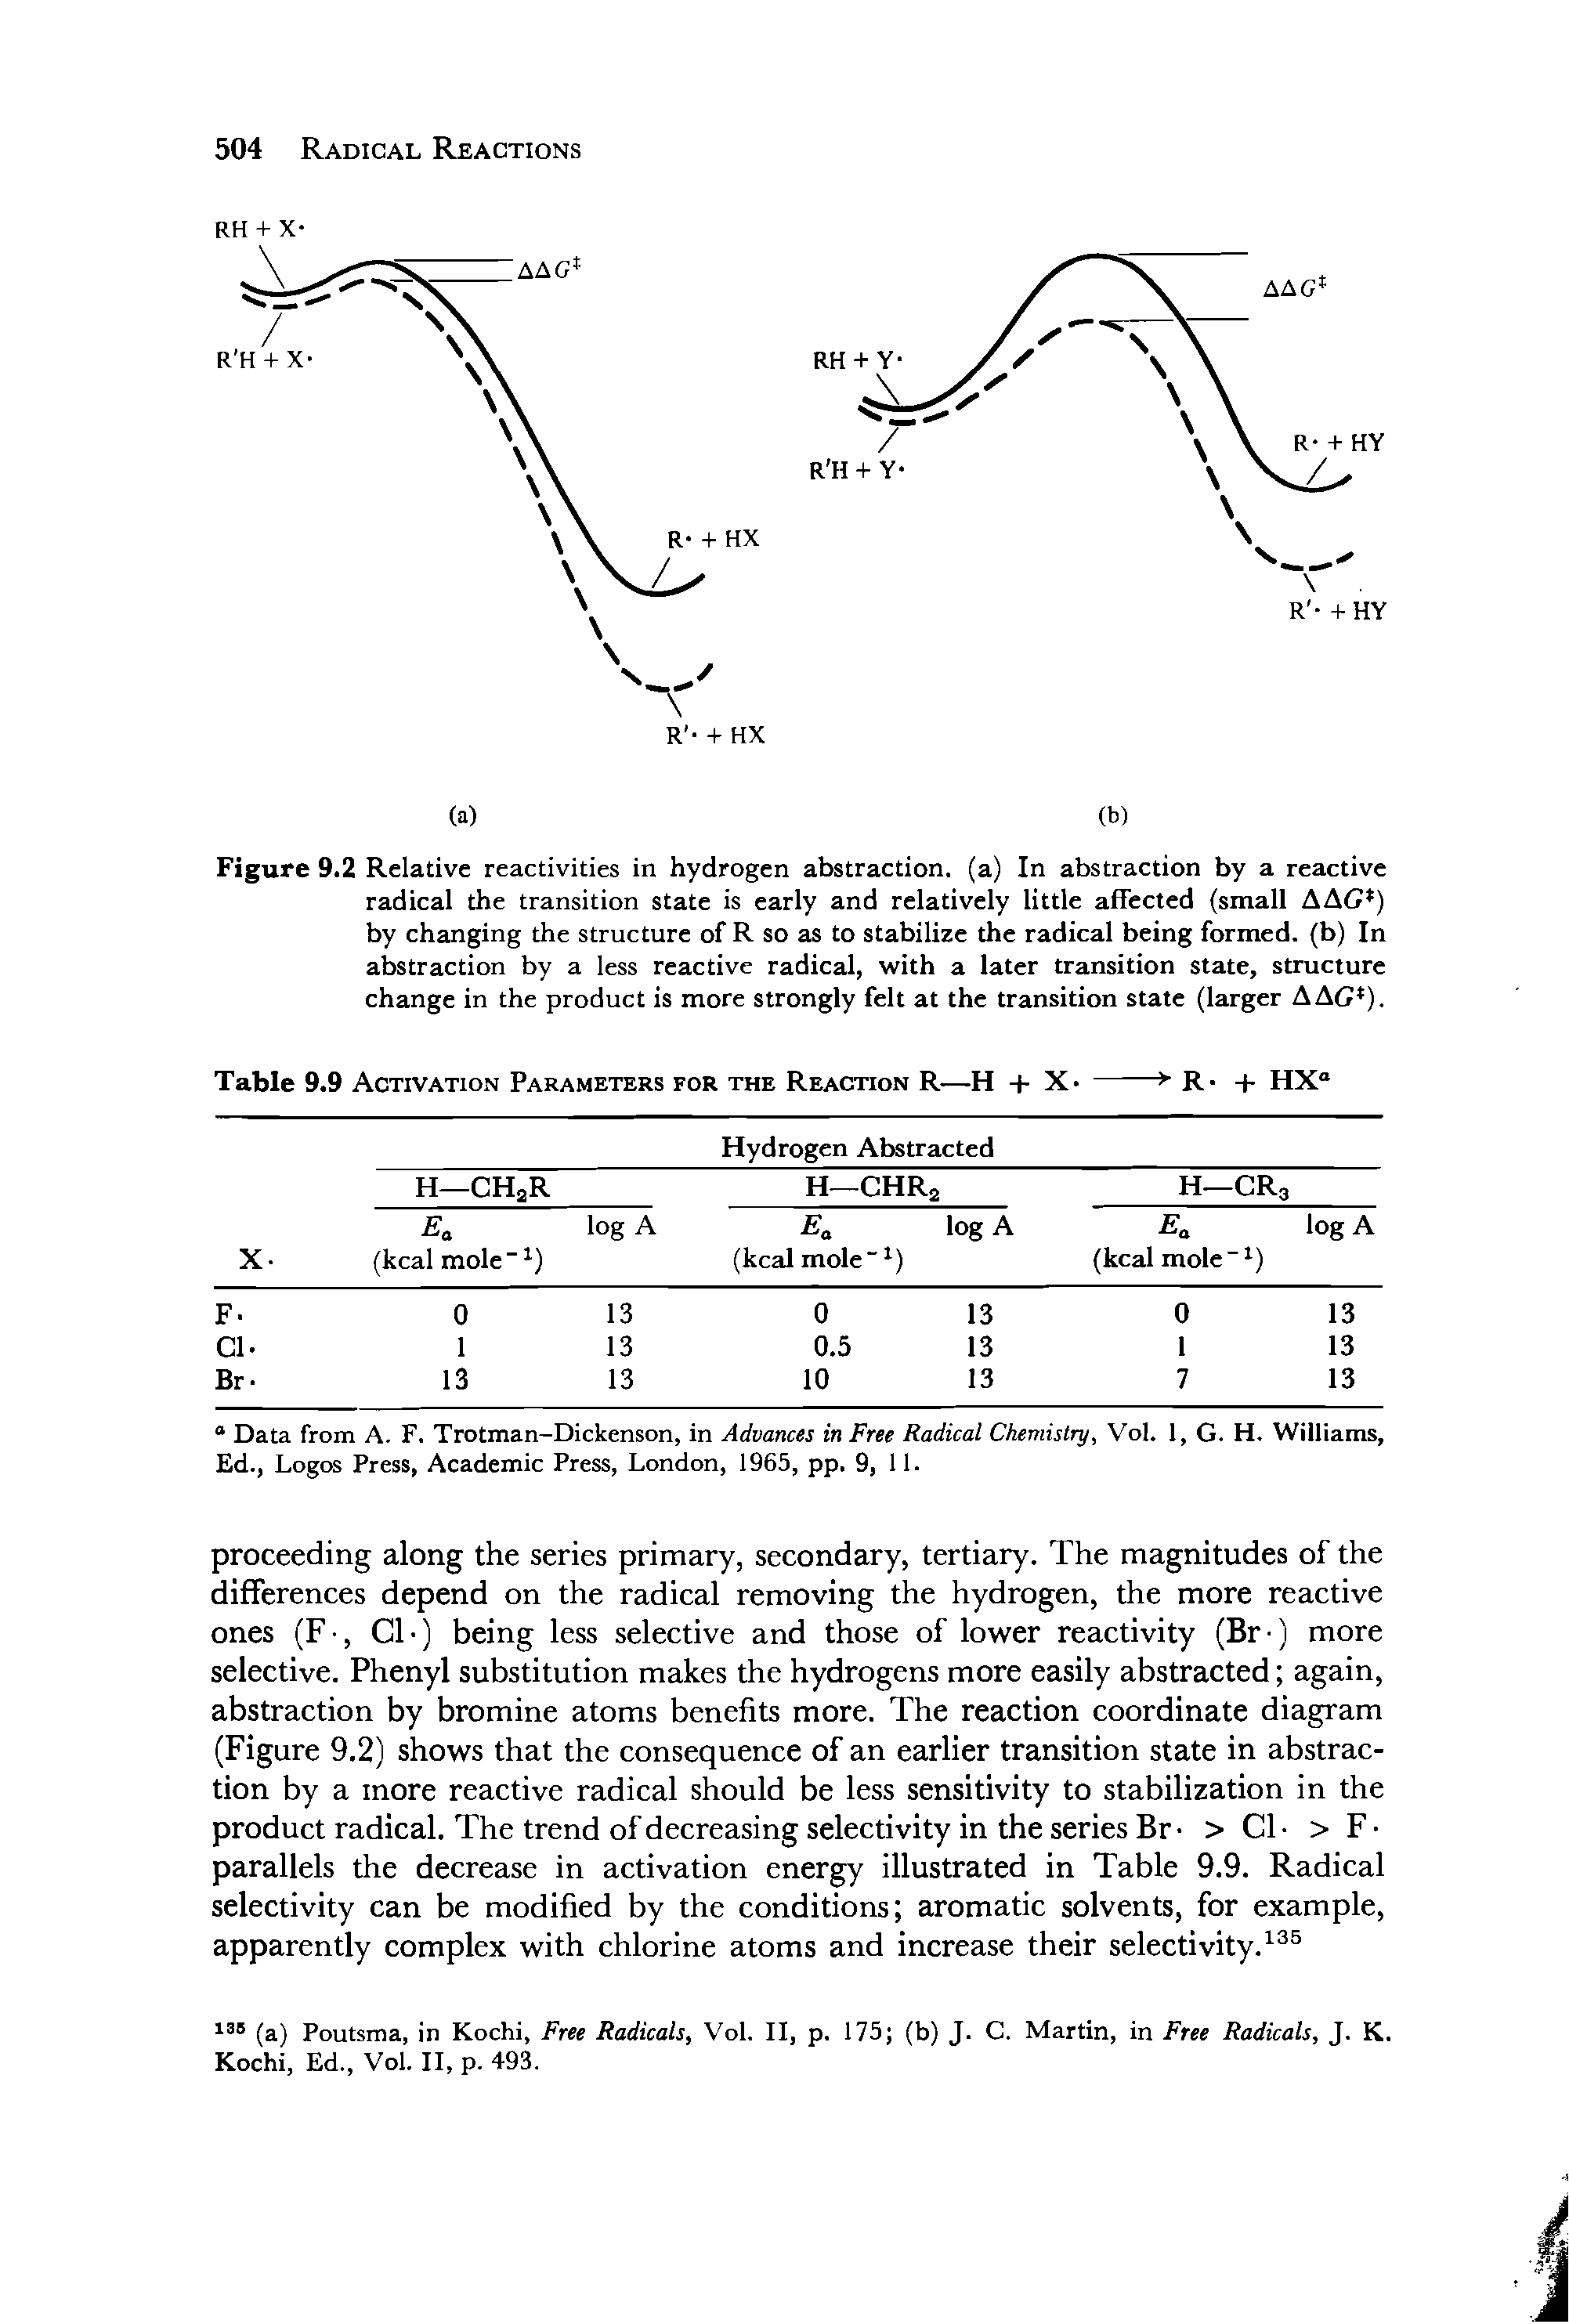 Figure 9.2 Relative reactivities in hydrogen abstraction, (a) In abstraction by a reactive radical the transition state is early and relatively little affected (small AAG ) by changing the structure of R so as to stabilize the radical being formed, (b) In abstraction by a less reactive radical, with a later transition state, structure change in the product is more strongly felt at the transition state (larger A AG ).